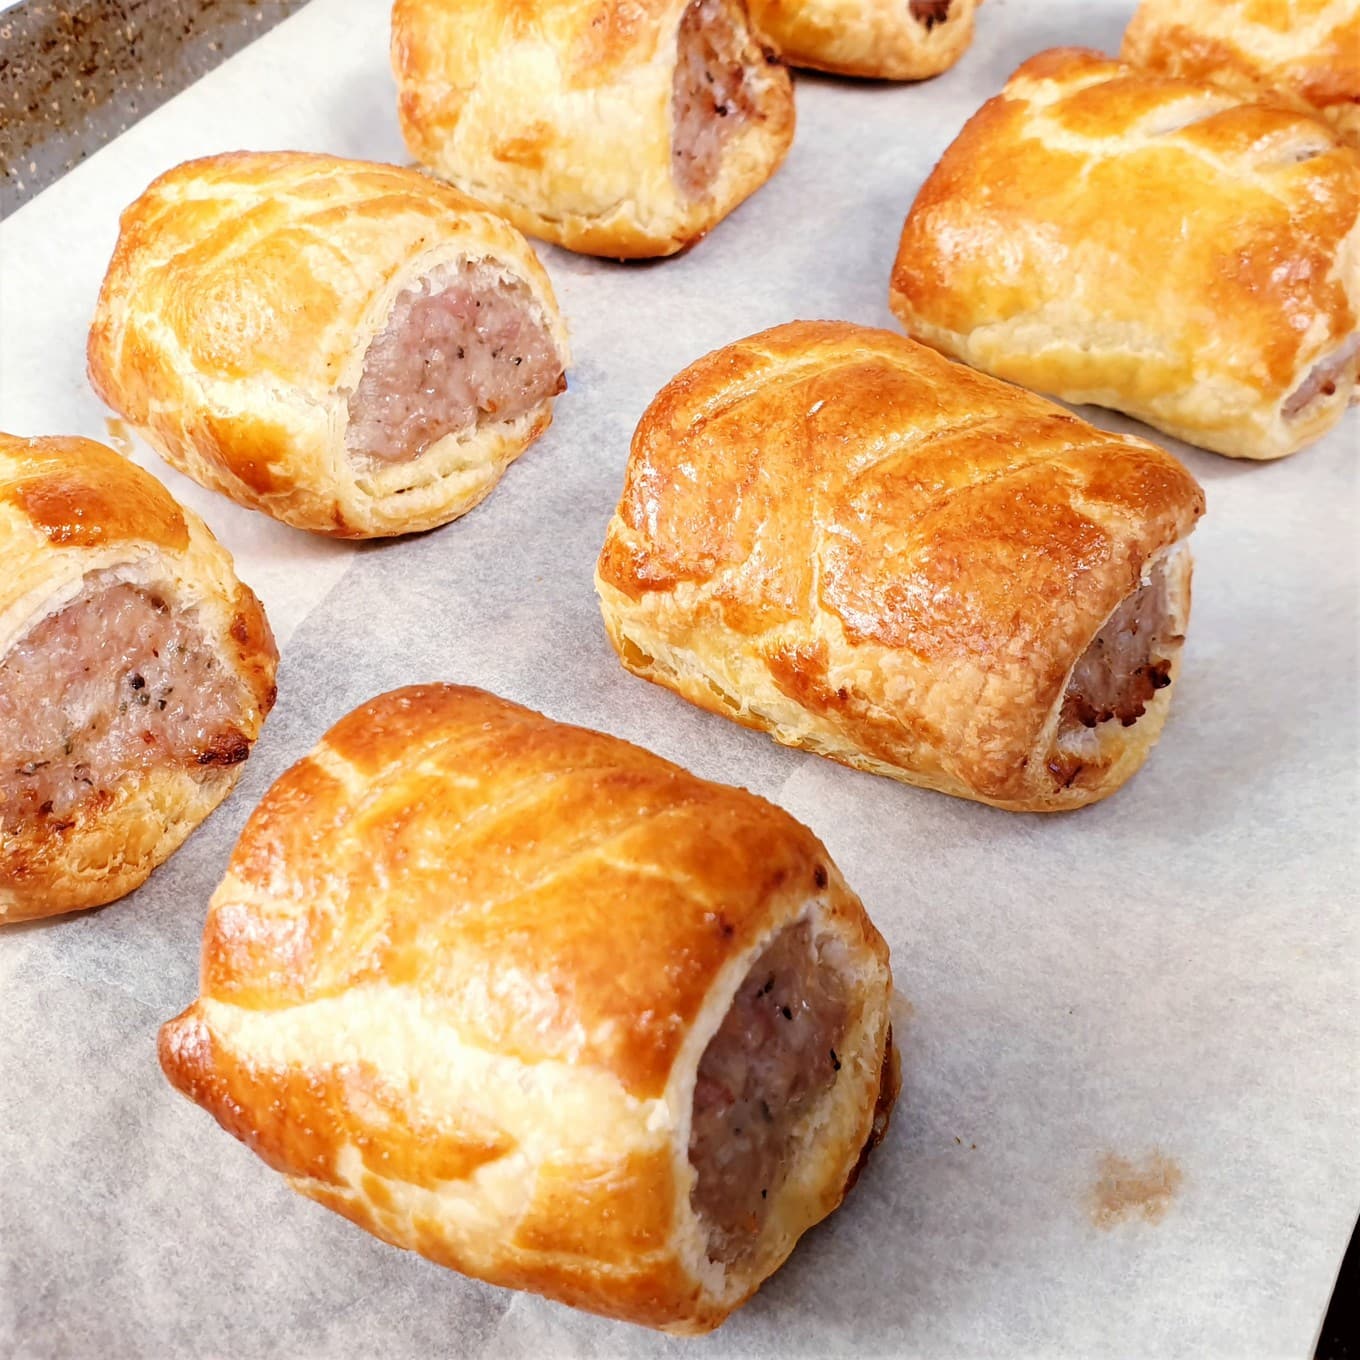 https://feastgloriousfeast.com/wp-content/uploads/2019/02/Puff-Pastry-Sausage-Rolls-3.jpg